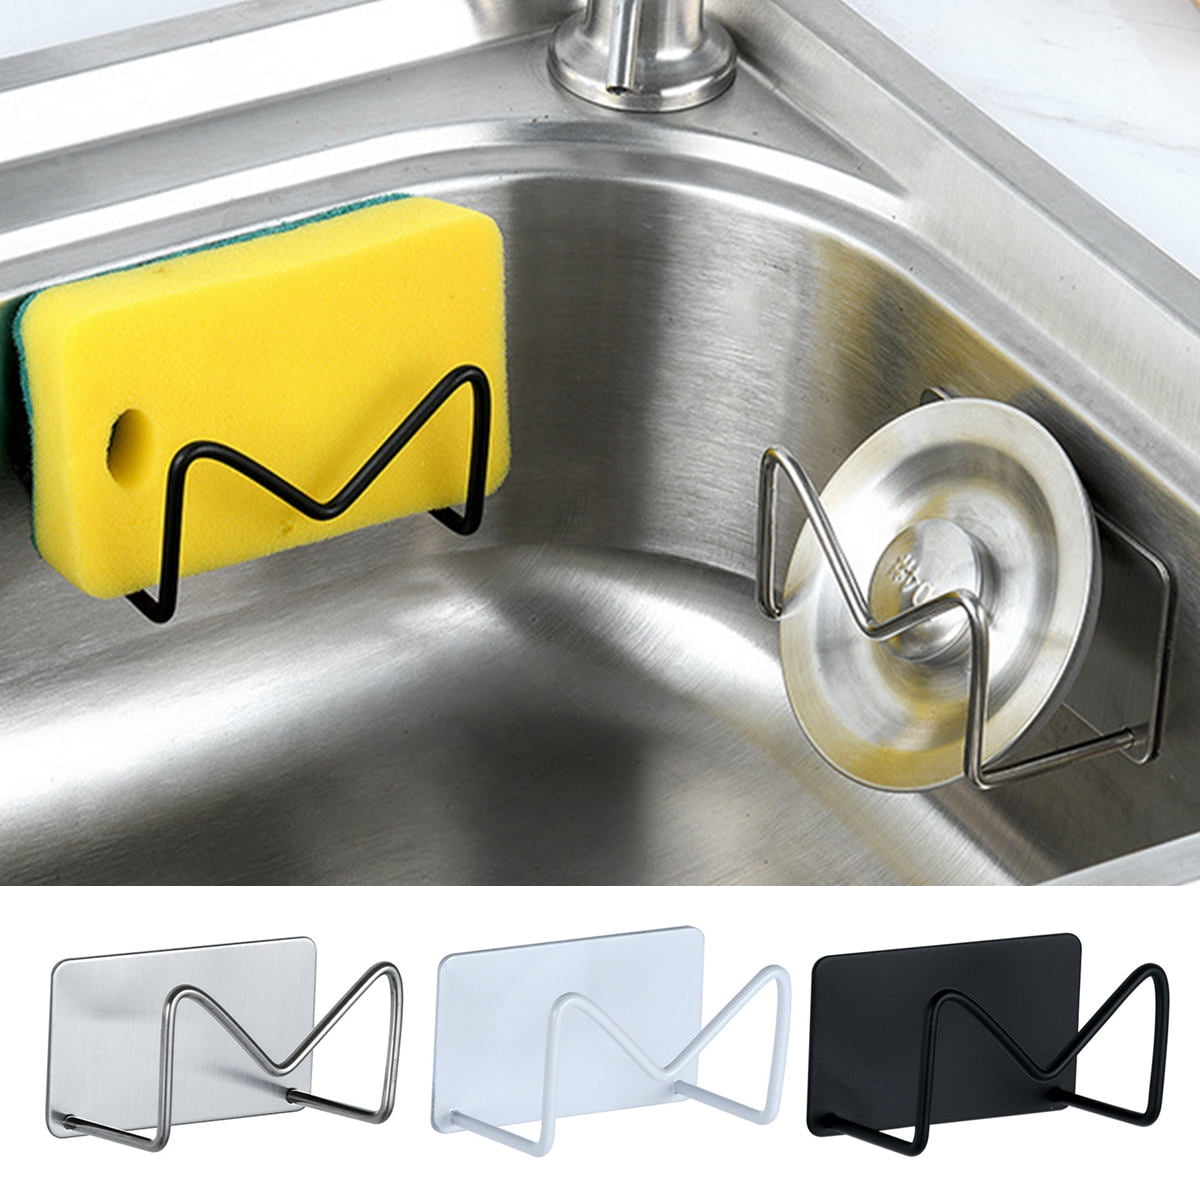 SunnyPoint NeverRust Kitchen Sink Suction Holder for Sponges; Aluminum, Mat  Black (Suction Cups/Adhesive)